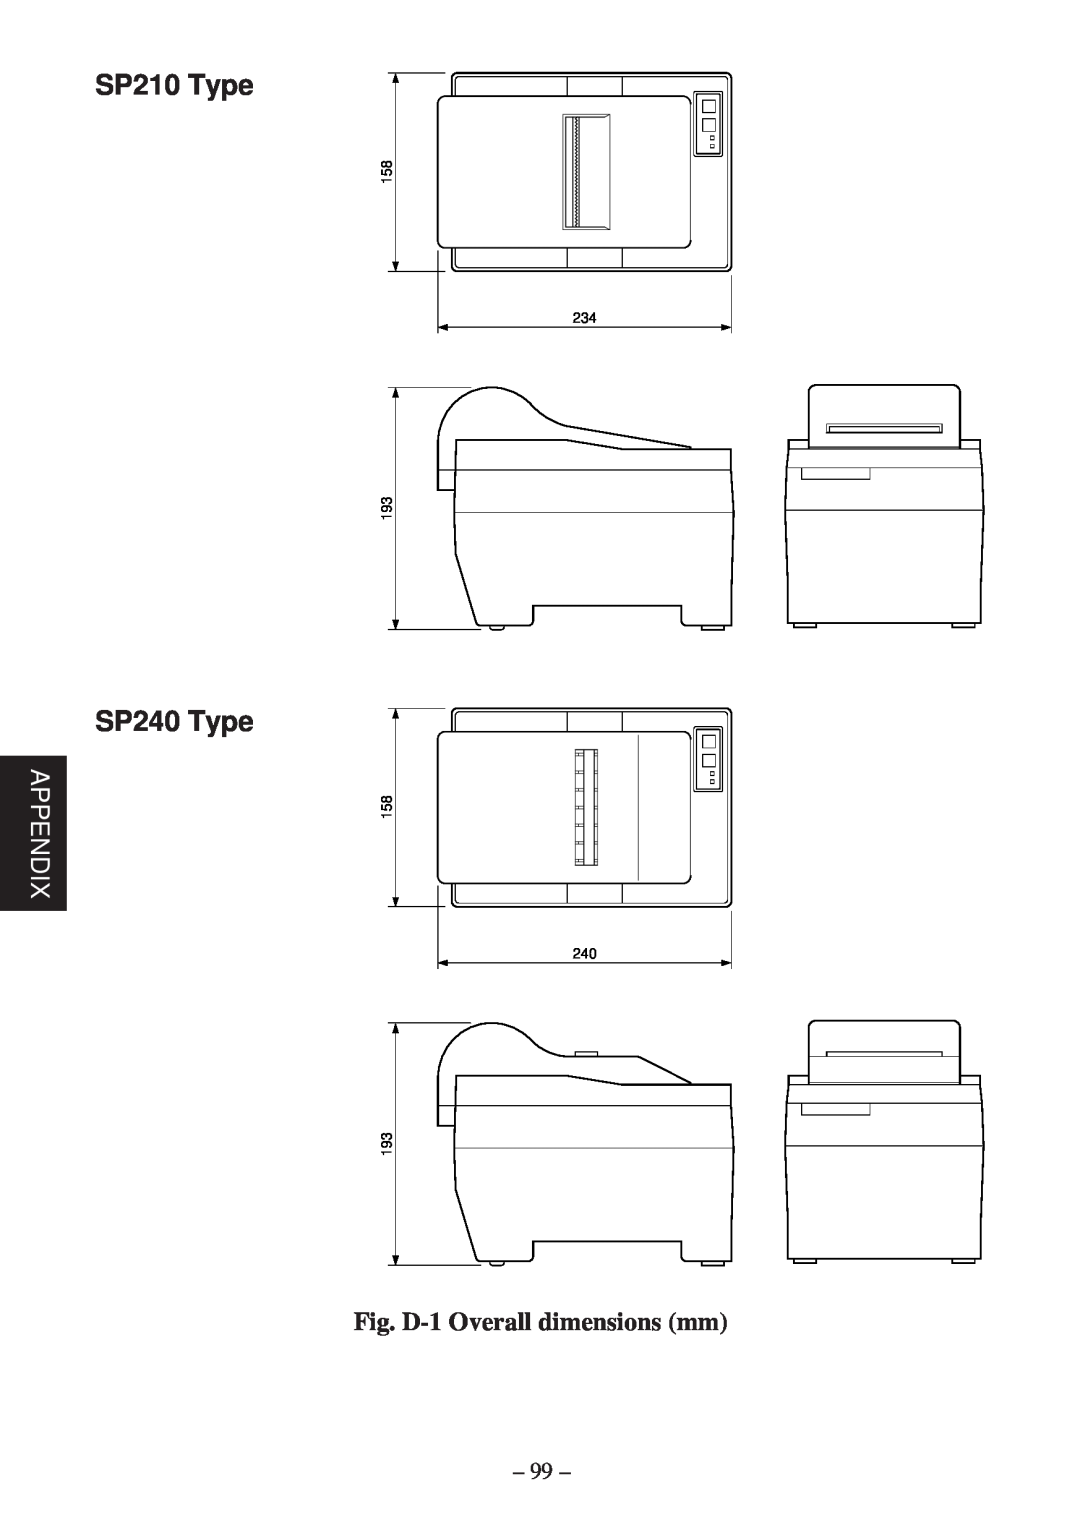 Star Micronics SP200F user manual SP210 Type, SP240 Type, Appendix, Fig. D-1 Overall dimensions mm, 158 234 193, 158 240 